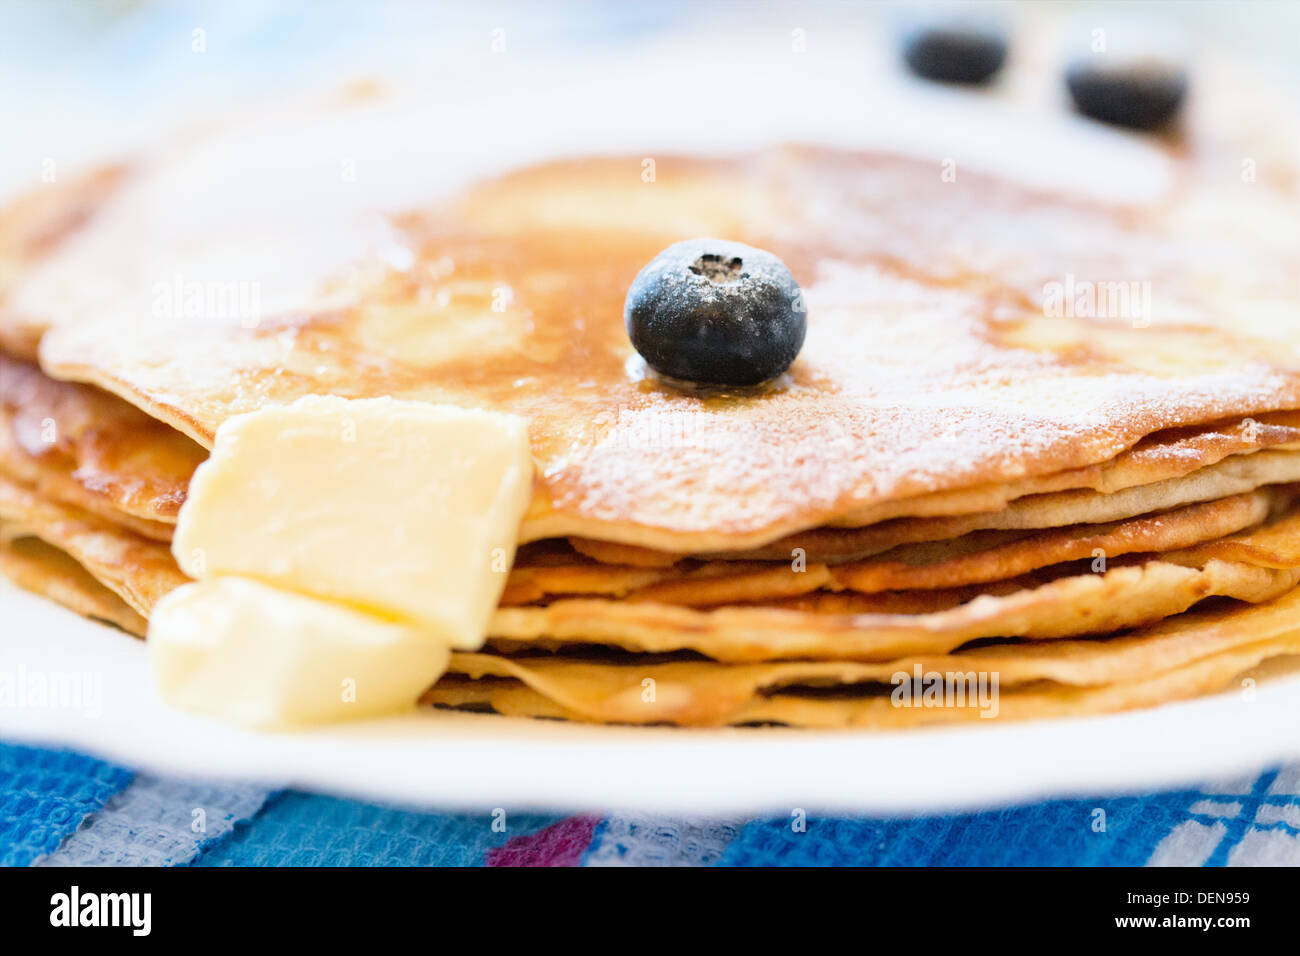 Pancakes on a plate Stock Photo